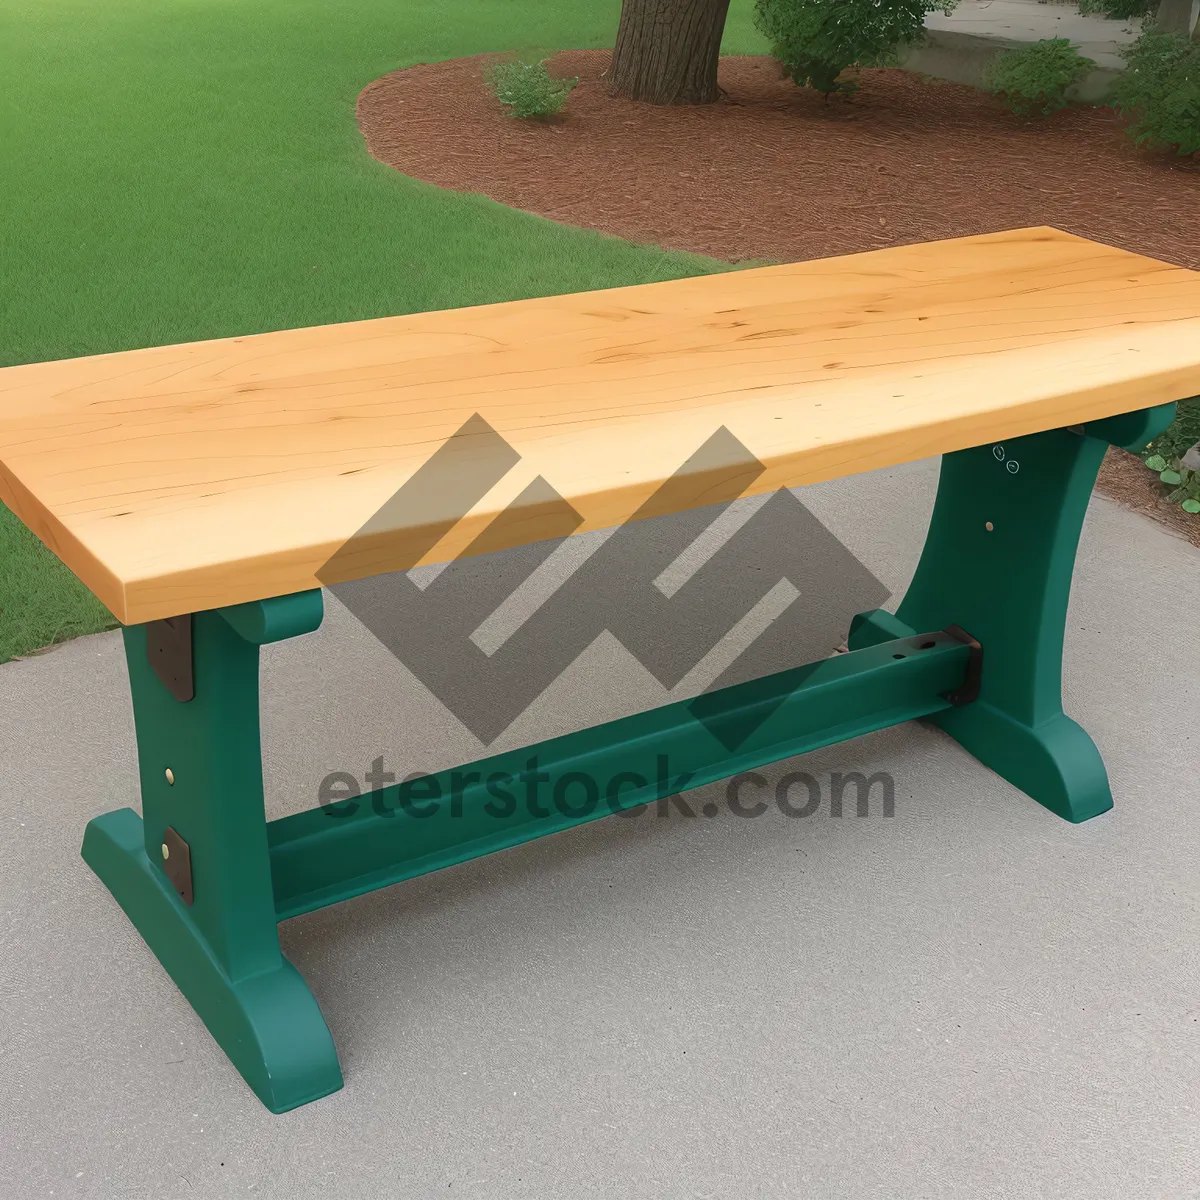 Picture of Wooden Gymnastics Stool with Tabletop Bench Clamp